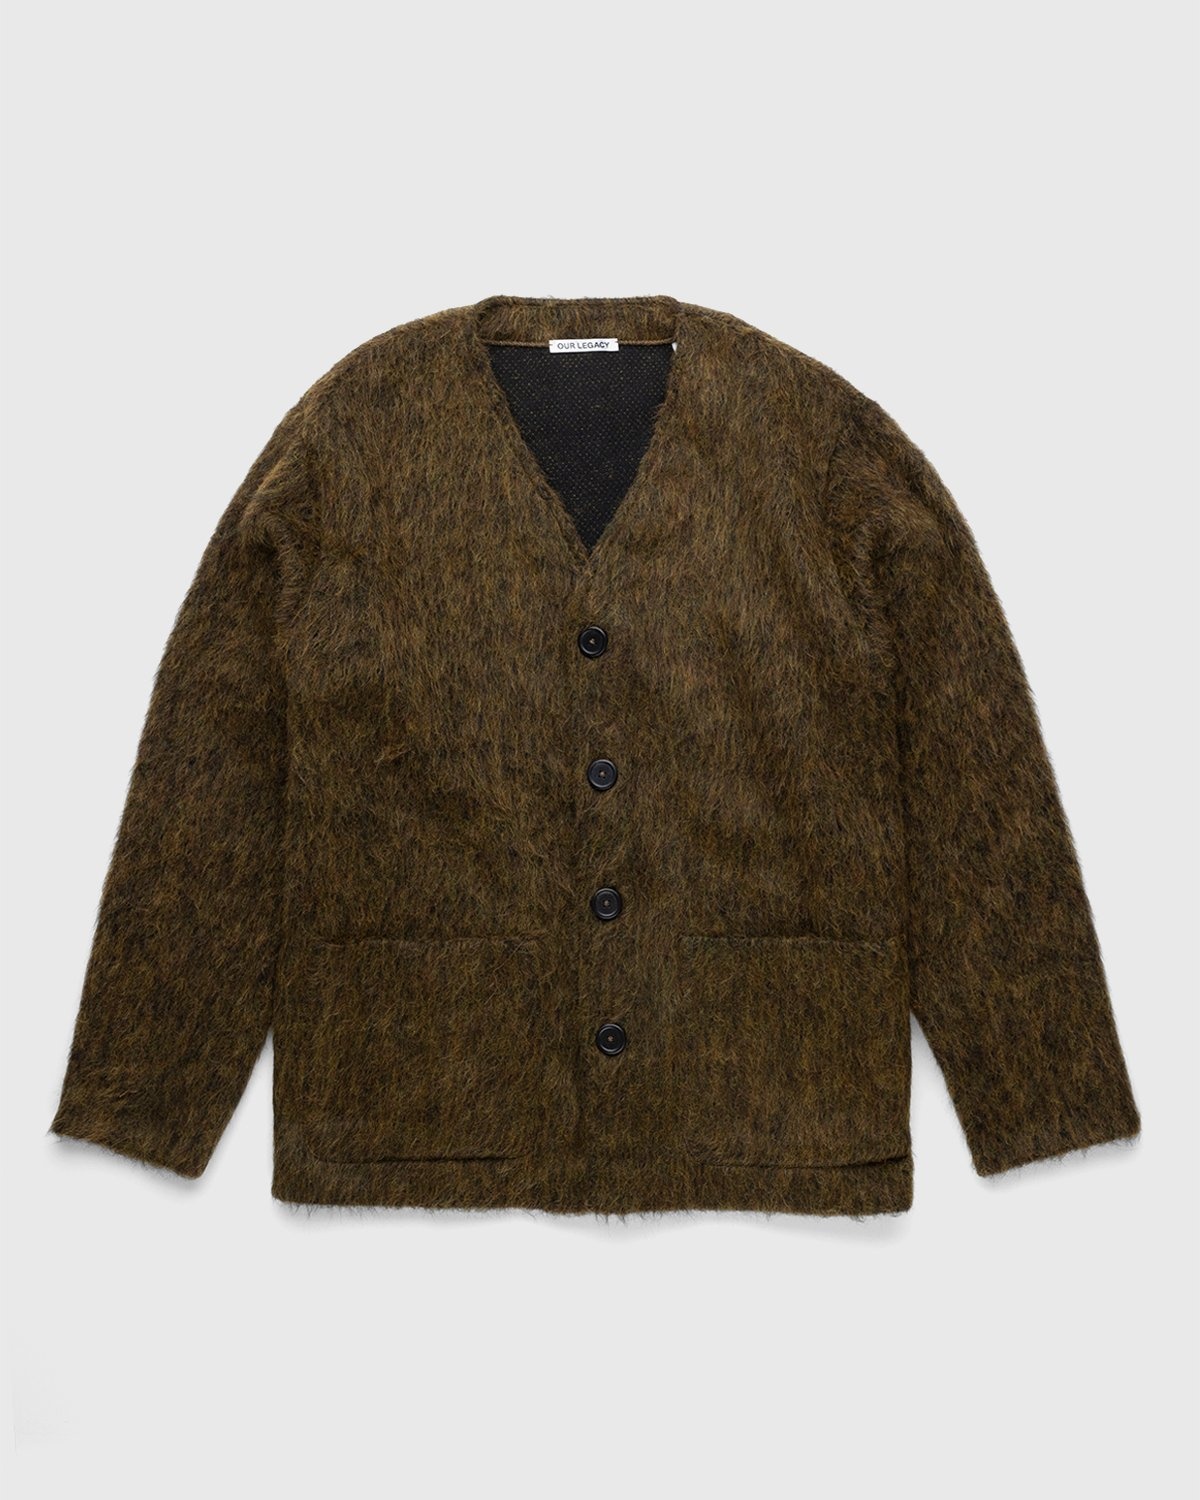 Our Legacy – Cardigan Olive Melange Mohair - Knitwear - Green - Image 1